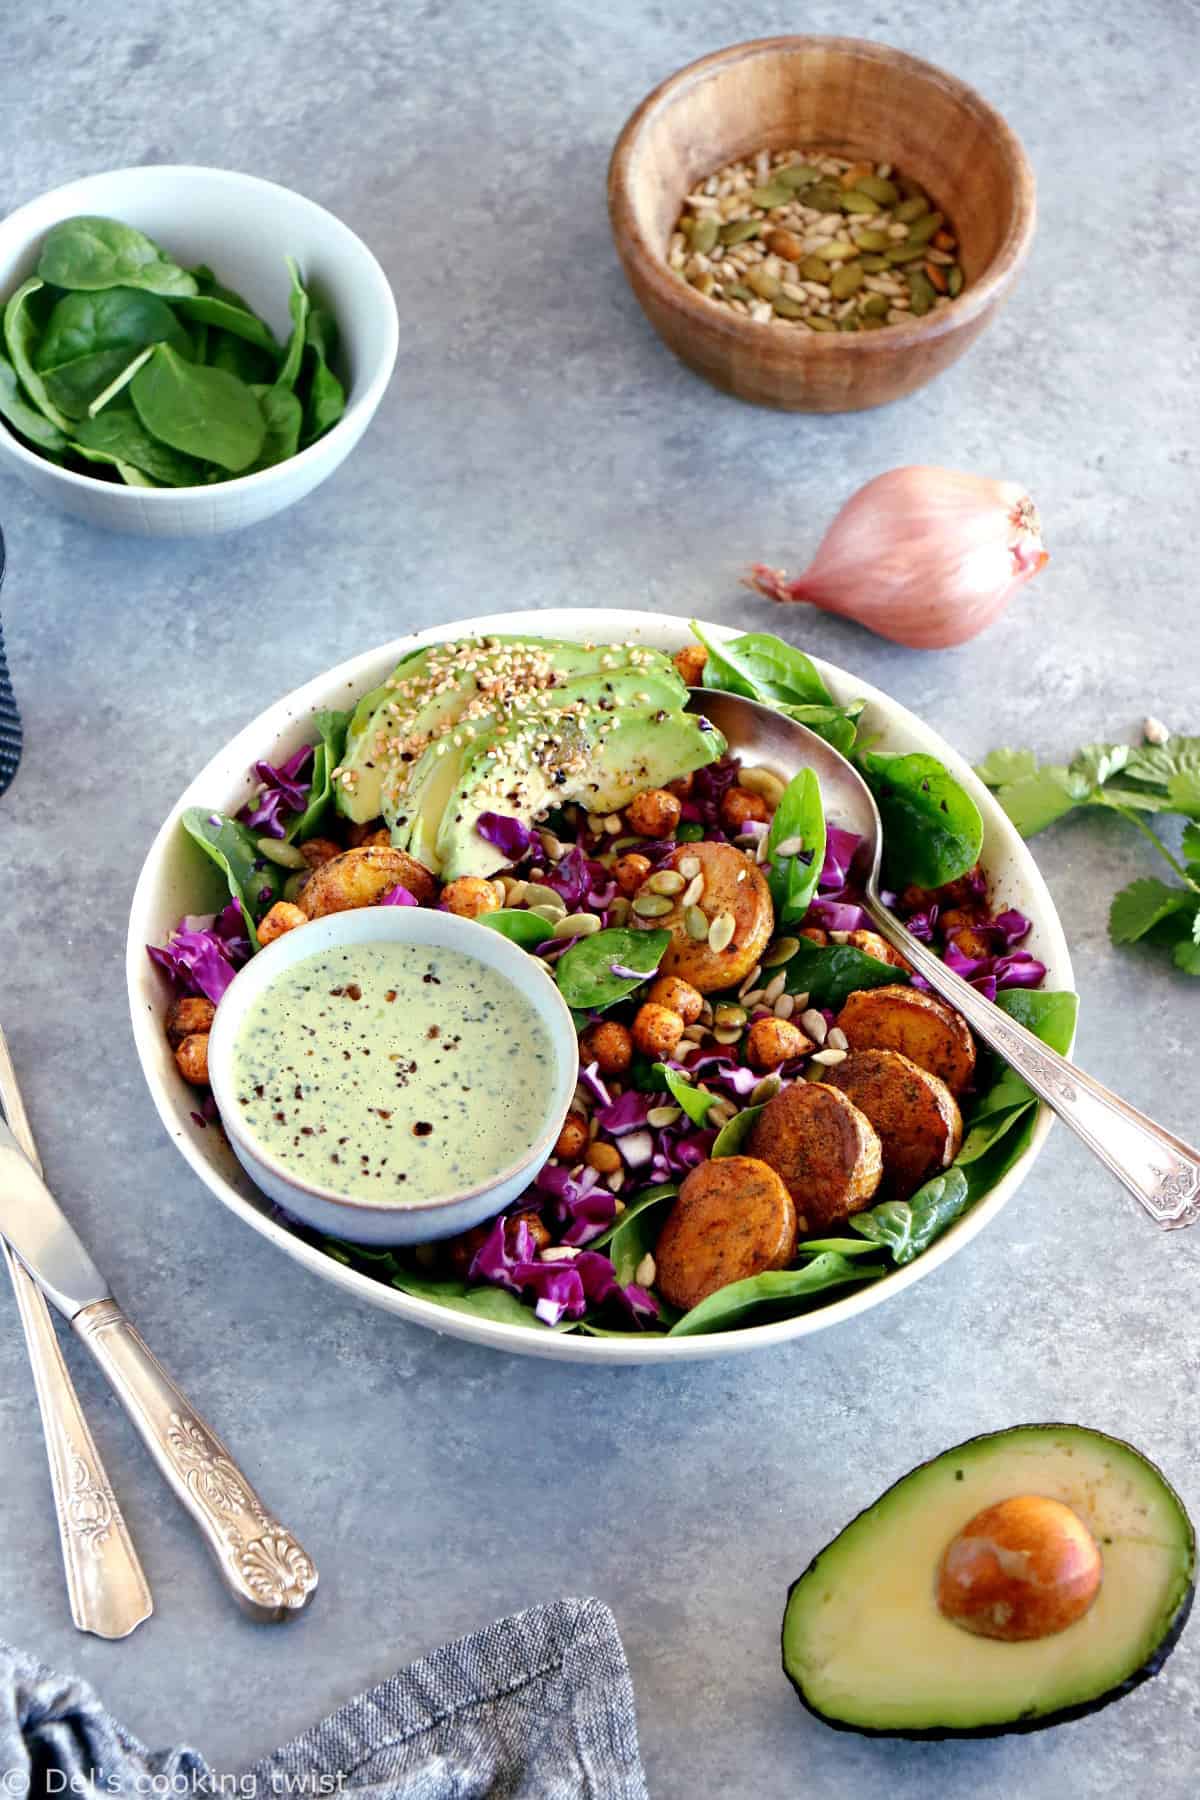 This nourishing buddha bowl recipe with green tahini sauce makes for a healthy, well-balanced meal, naturally vegan and gluten-free.